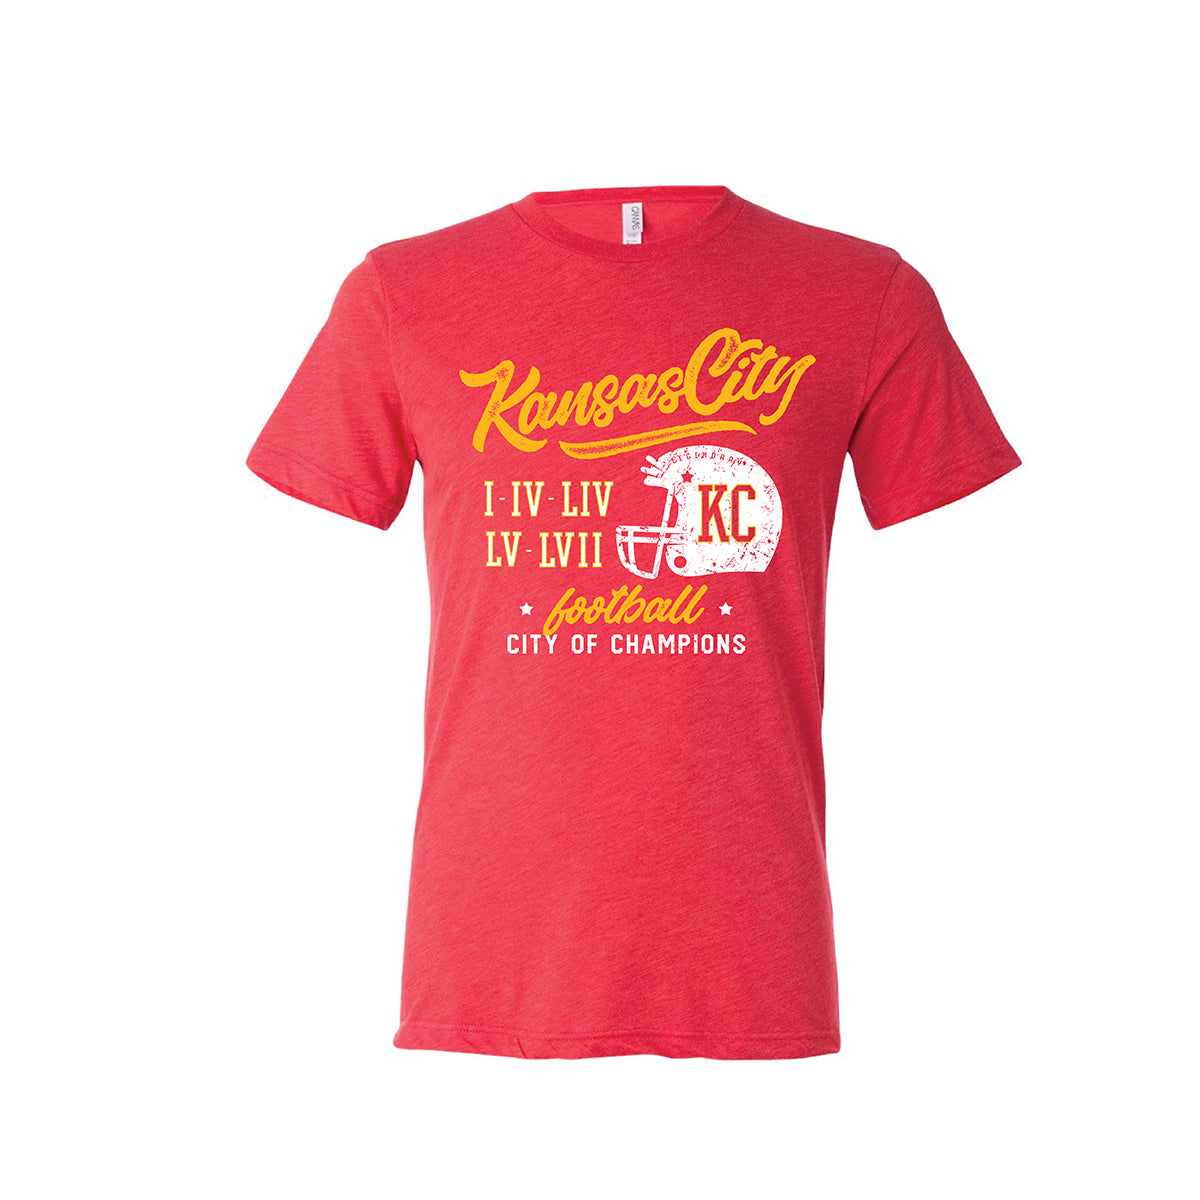 City of Champions Youth Tee in Red